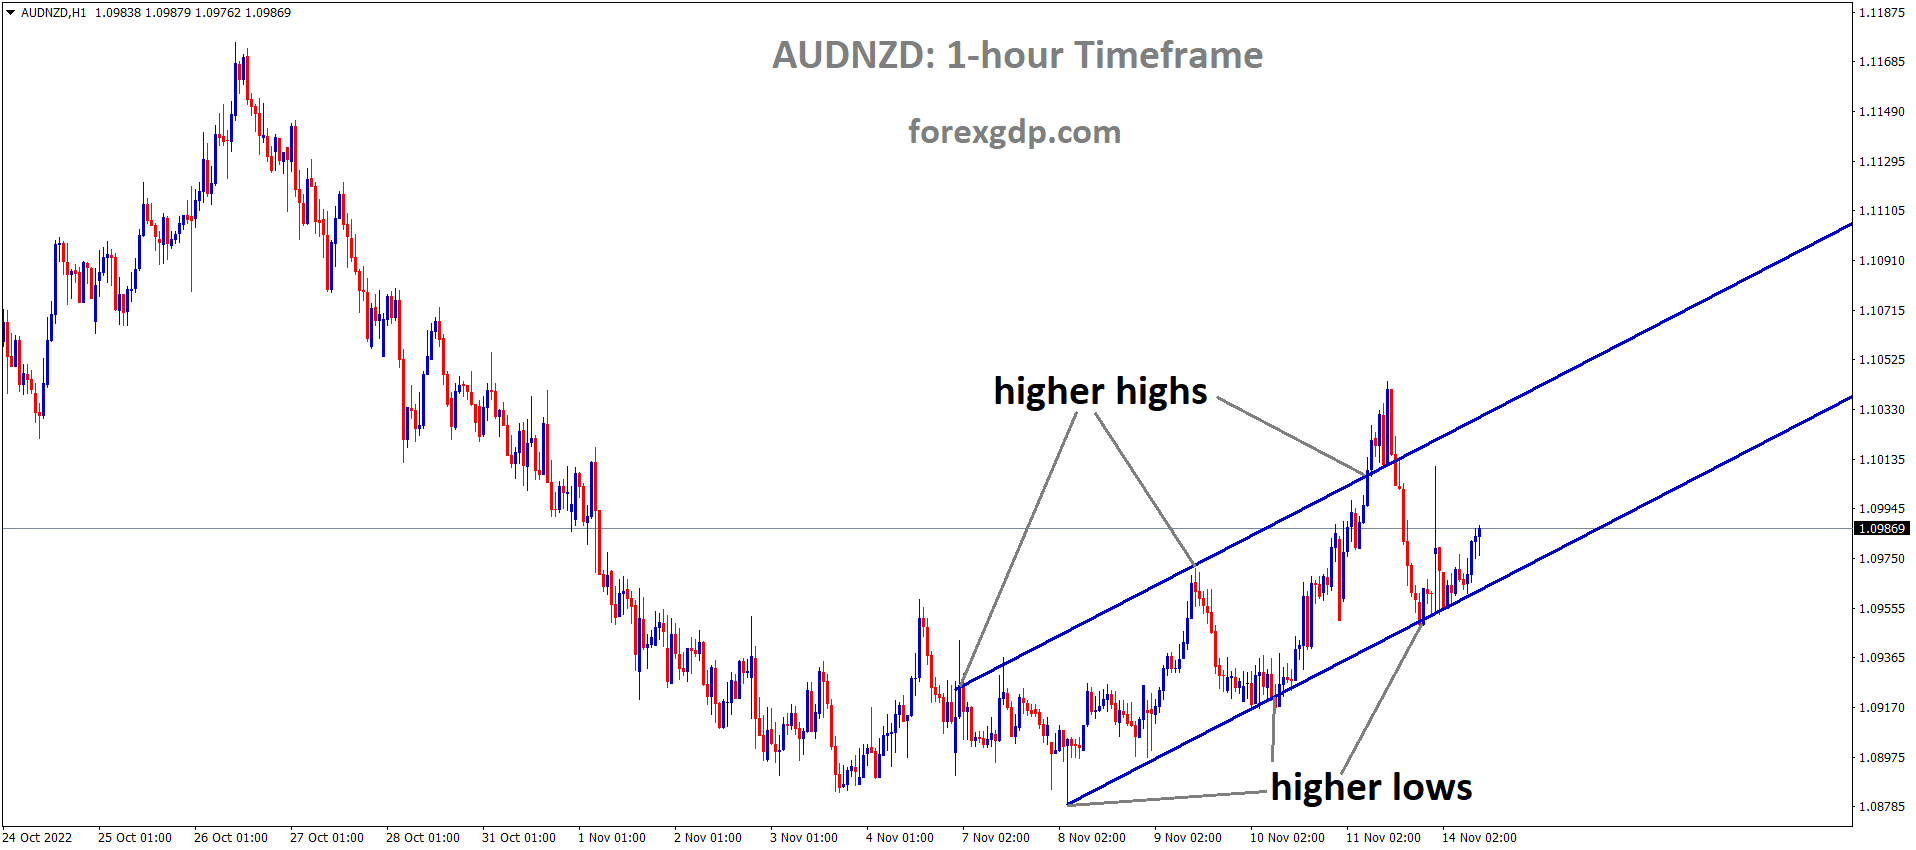 AUDNZD is moving in an Ascending channel and the market has rebounded from the higher low area of the channel